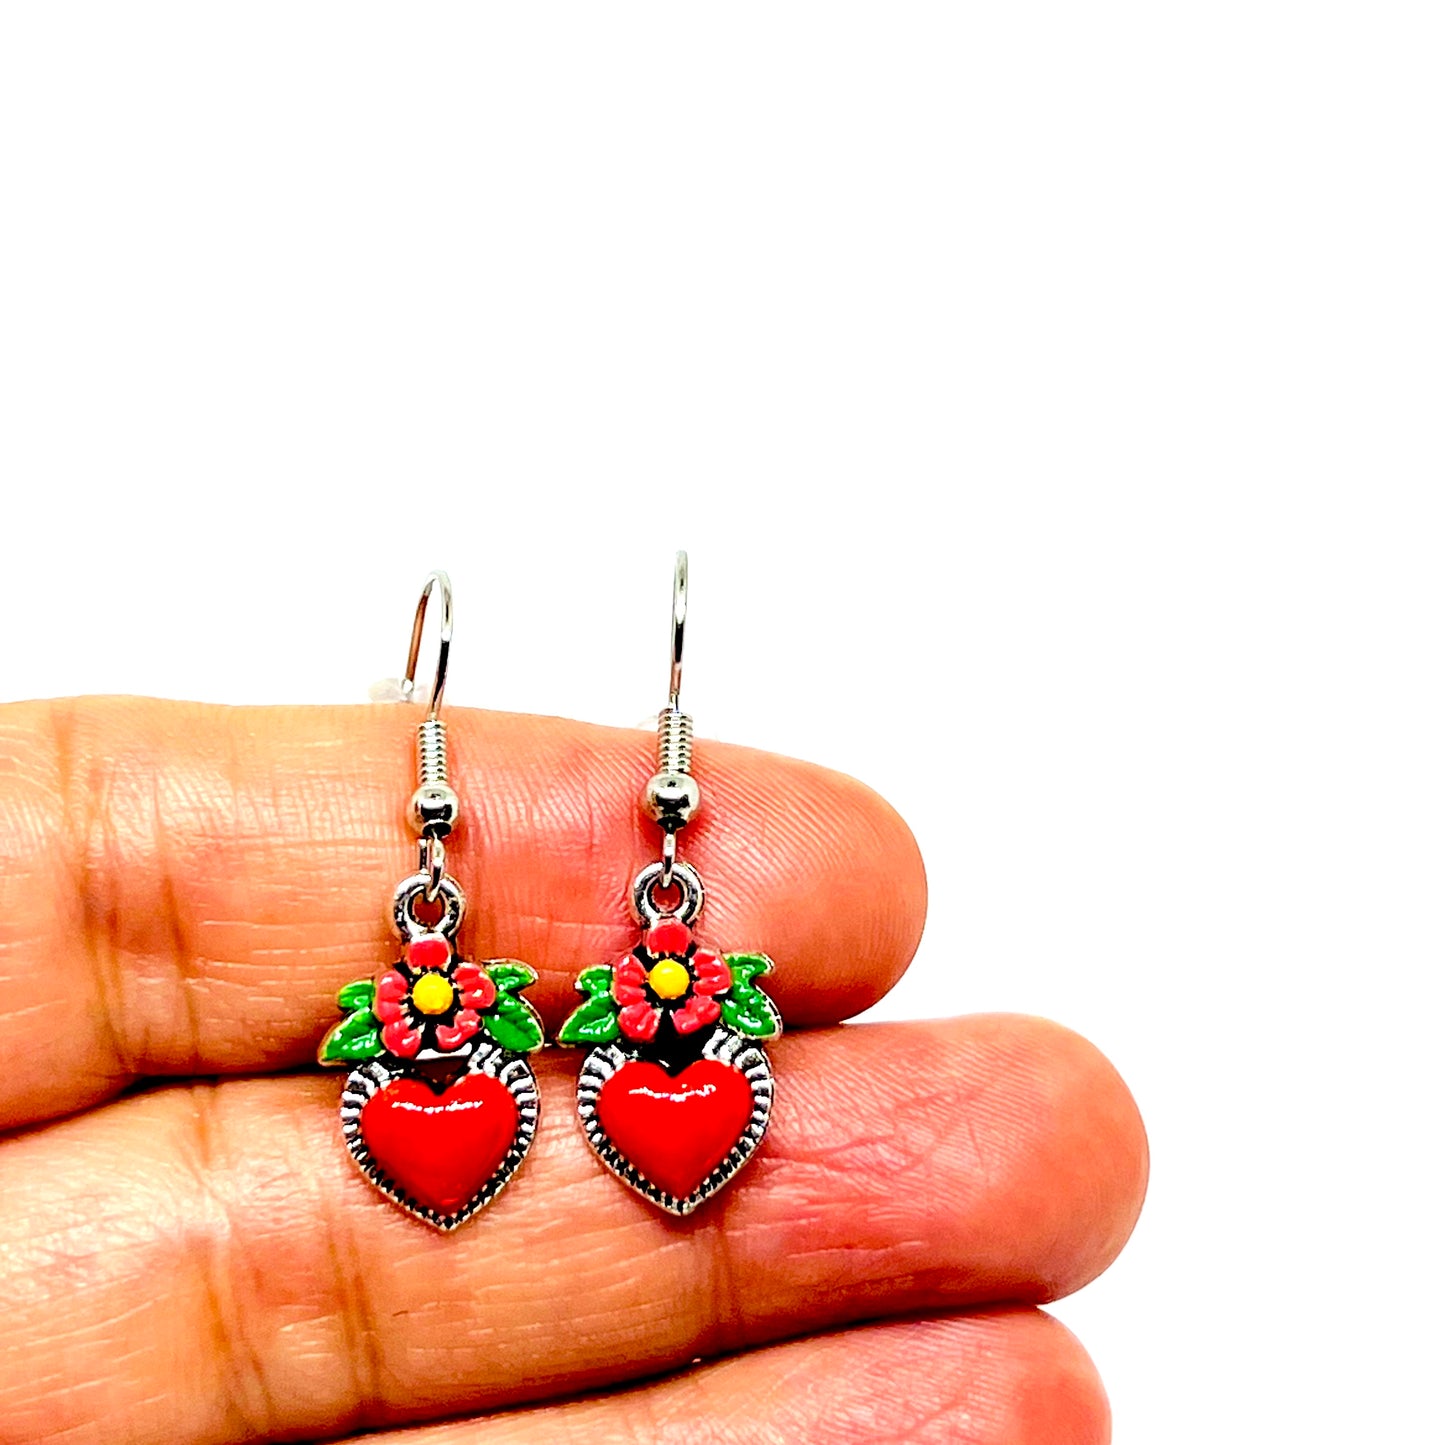 Hand painted heart and flower silver mexico earrings inspired by Frida Kahlo. Red heart, pinFlowered heart enamel earrings. Small red heart with pink flowers with yellow center and green leaves. Gorgeous Frida Kahlo inspired earrings. Mexican earrings. Mexican jewelry for girls and women. Drop and dangle.k yellow and green acrylic paint